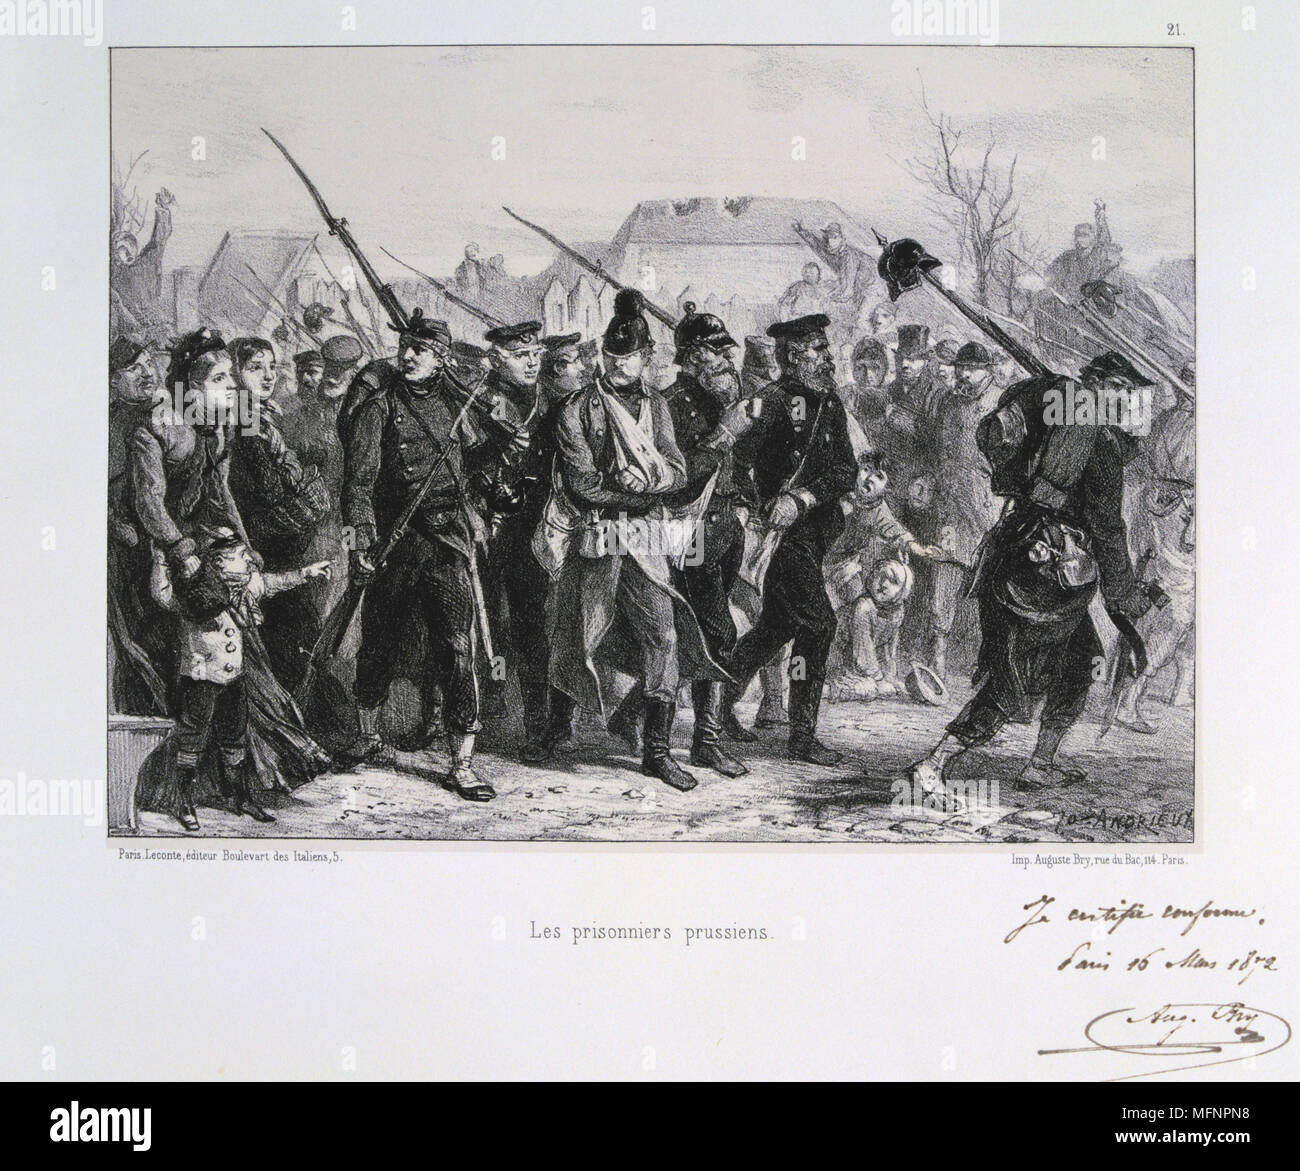 Franco-Prussian War 1870-1871:   Prussian prisoners-of-war. From a series of lithographs  by Clement August Andrieux on the Gardes Nationales. Stock Photo